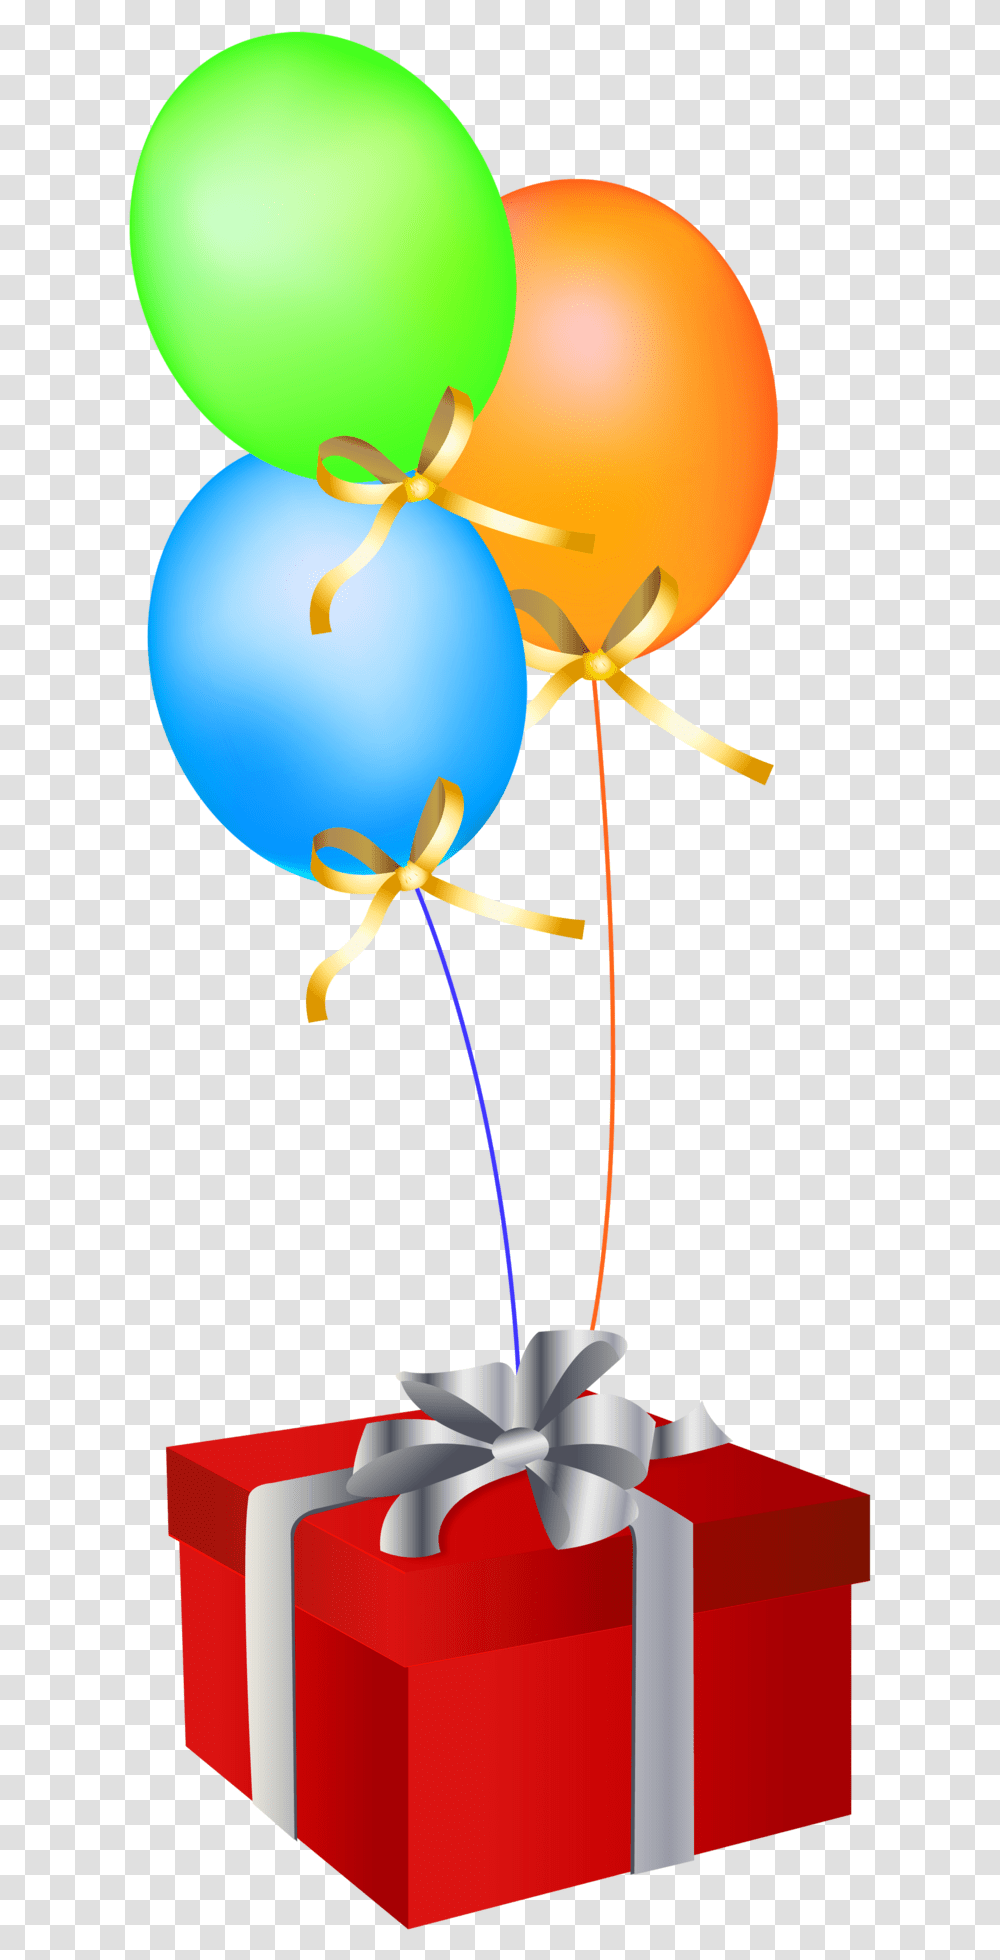 Free Red Gift Box With Balloons Images Gift Box And Balloon, Lamp, Rattle Transparent Png